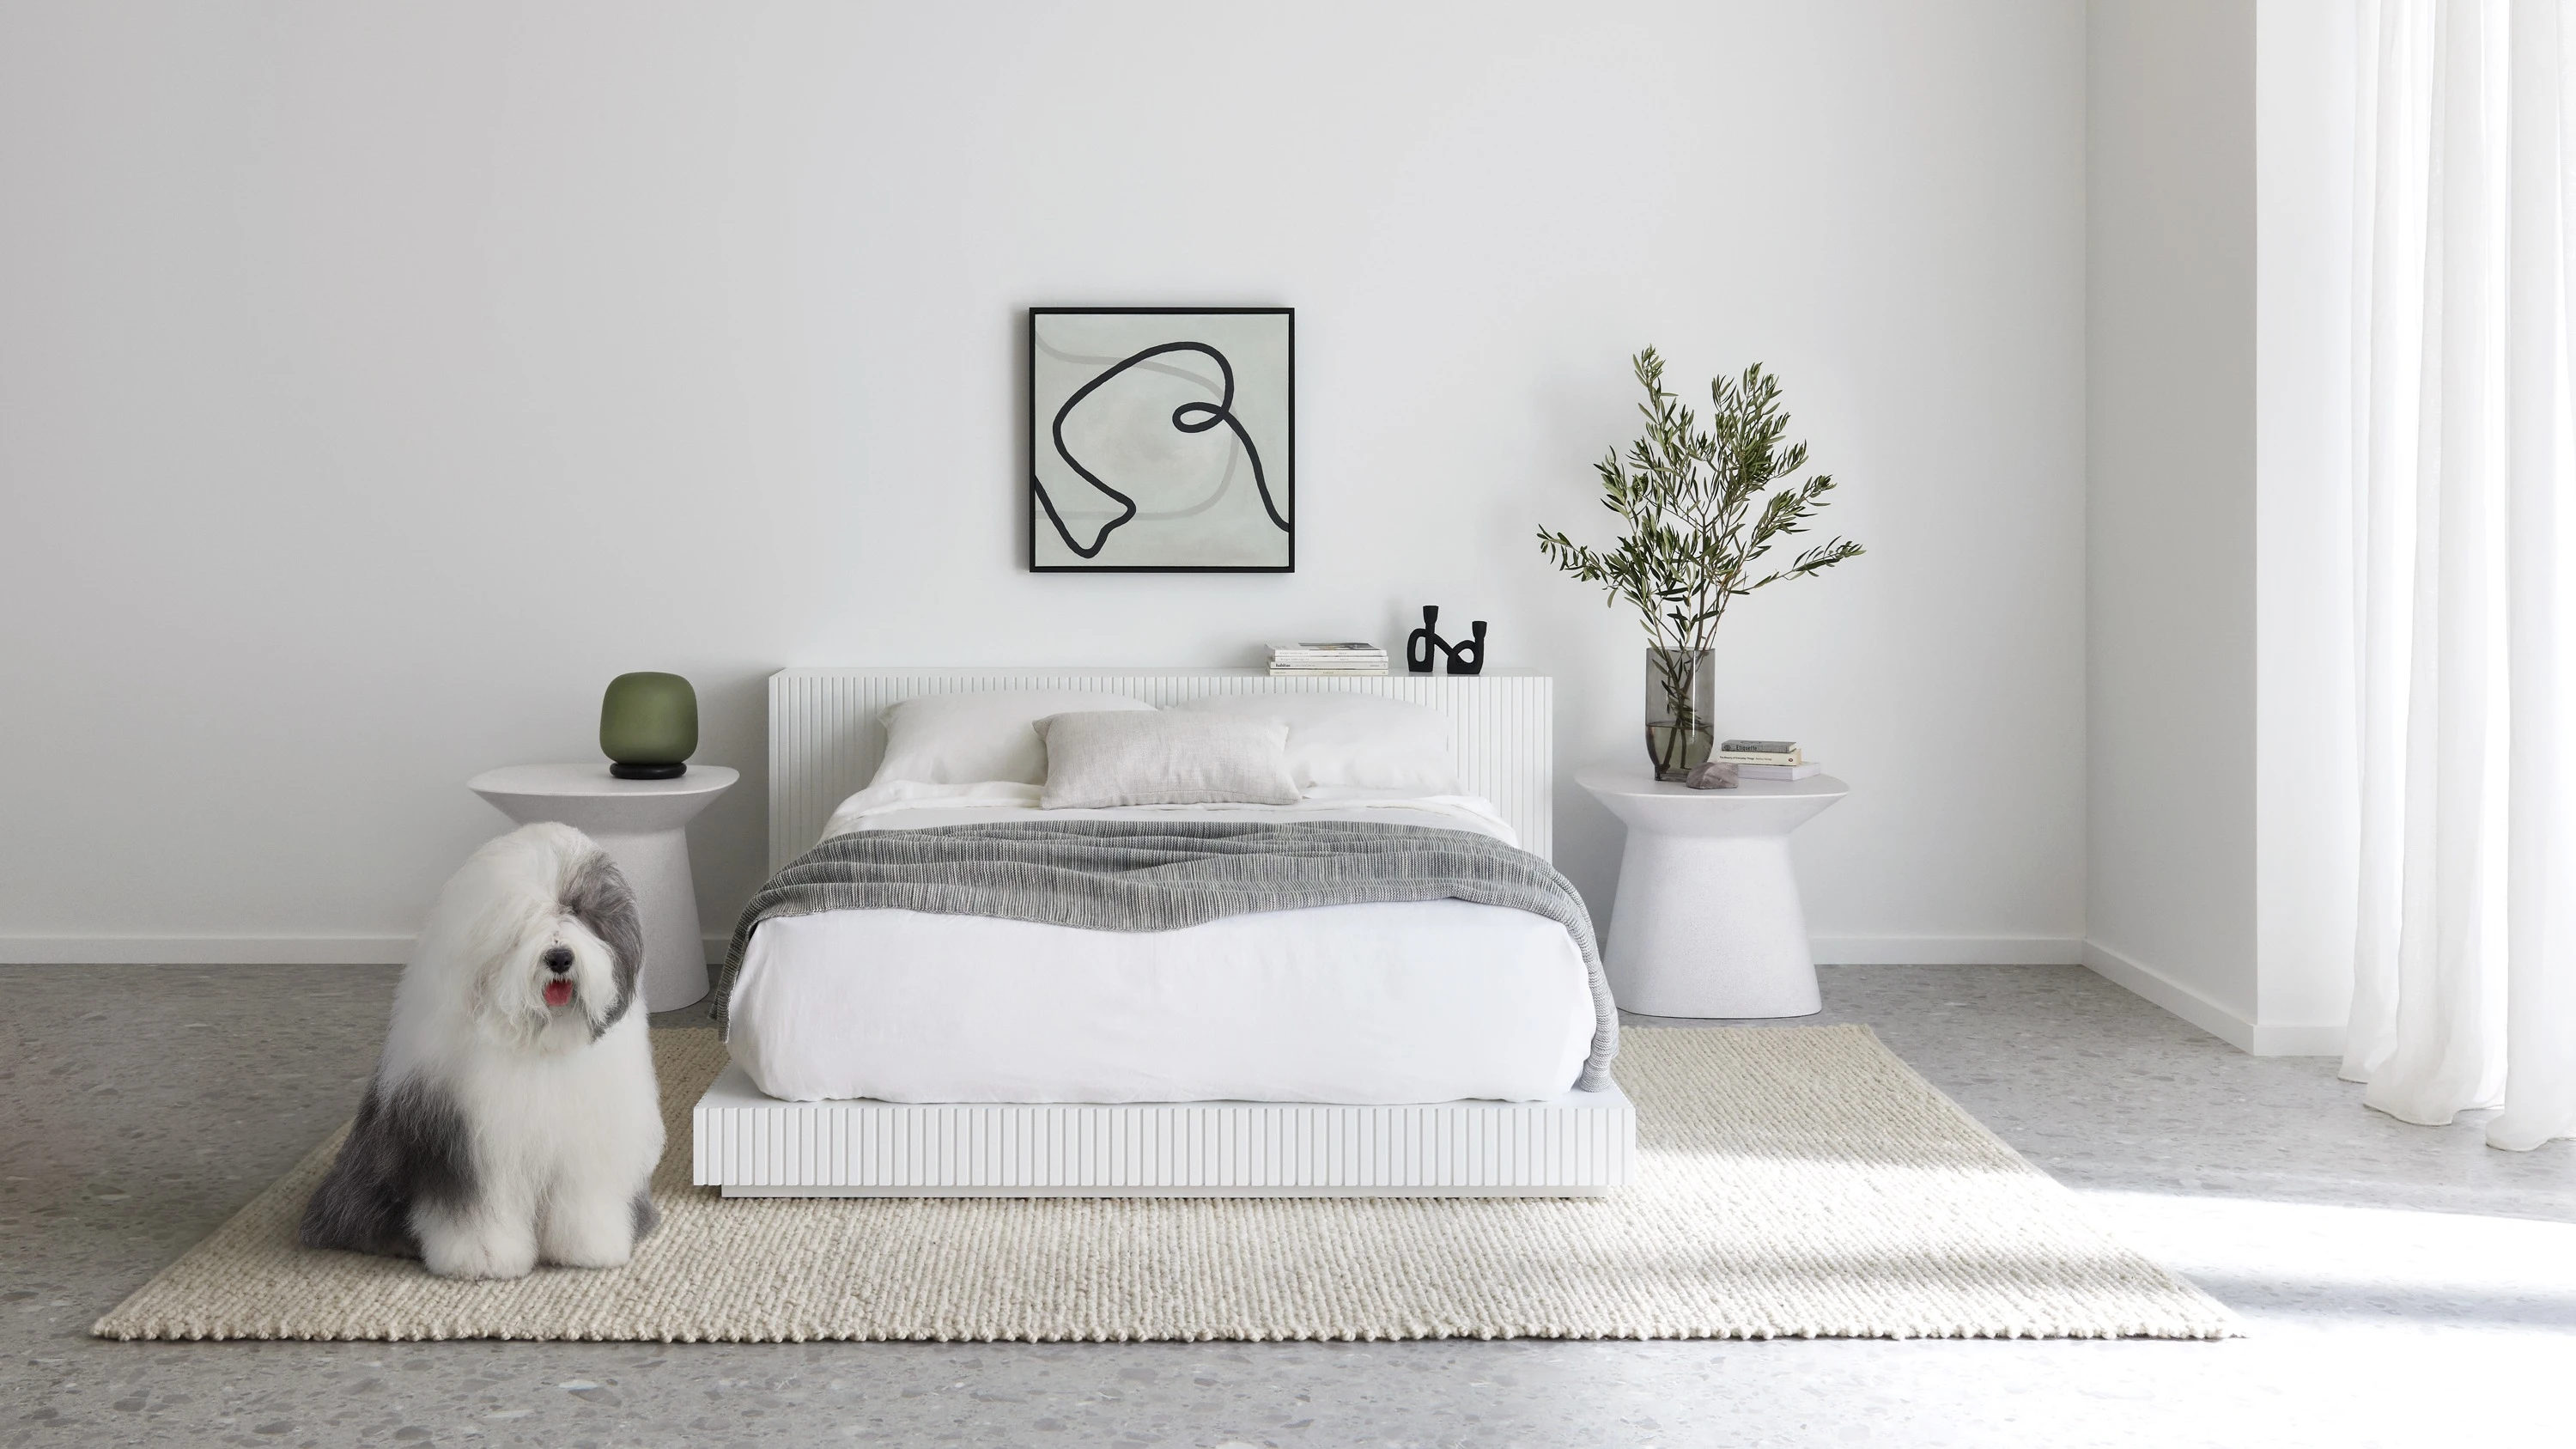 Bed and bedside tables against wall with artwork featured. Dulux dog in front of bed.